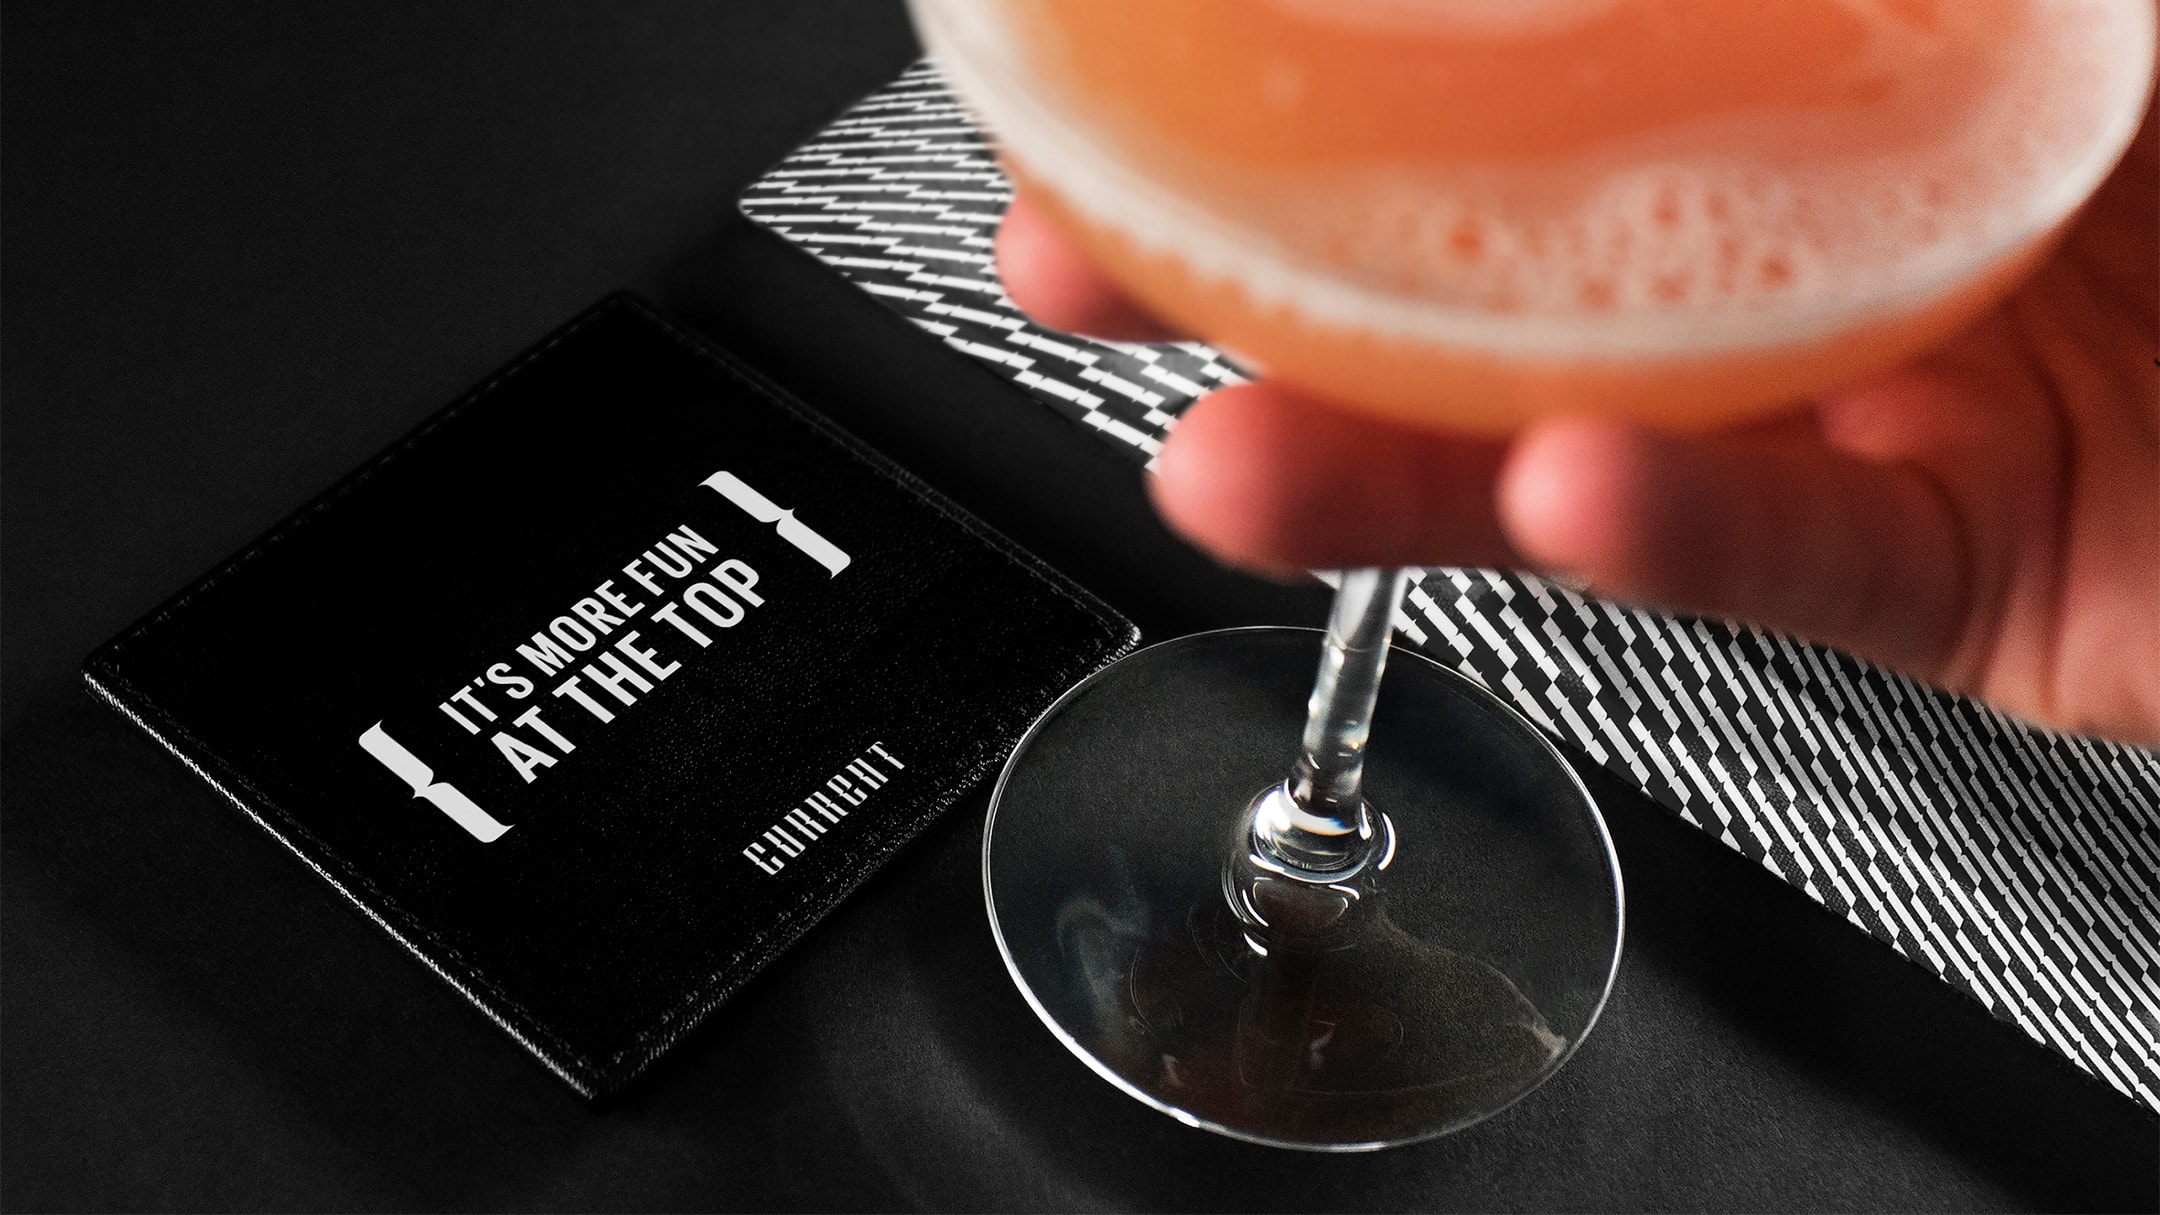 Current hotel branded coaster with a drink.